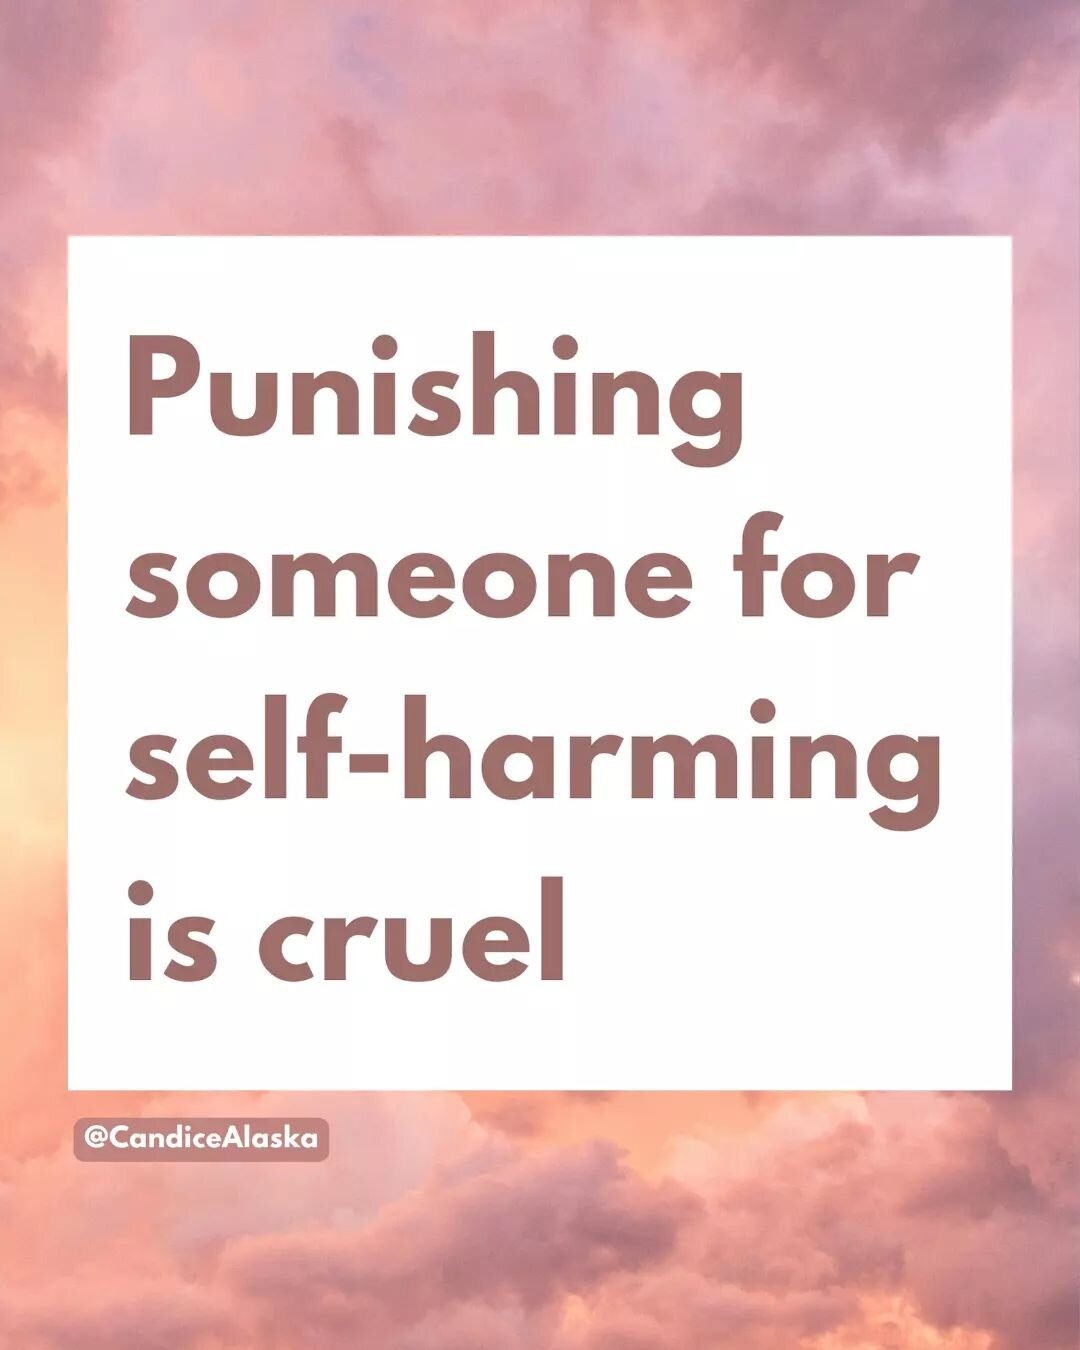 CW self-harm, sanism, medical ab*se. 

People who self-harm are not &quot;broken&quot; or less-than. People do not become whole or more worthy of resources, care and dignity when they stop self-harming. People who self-harm are ALREADY whole and wort